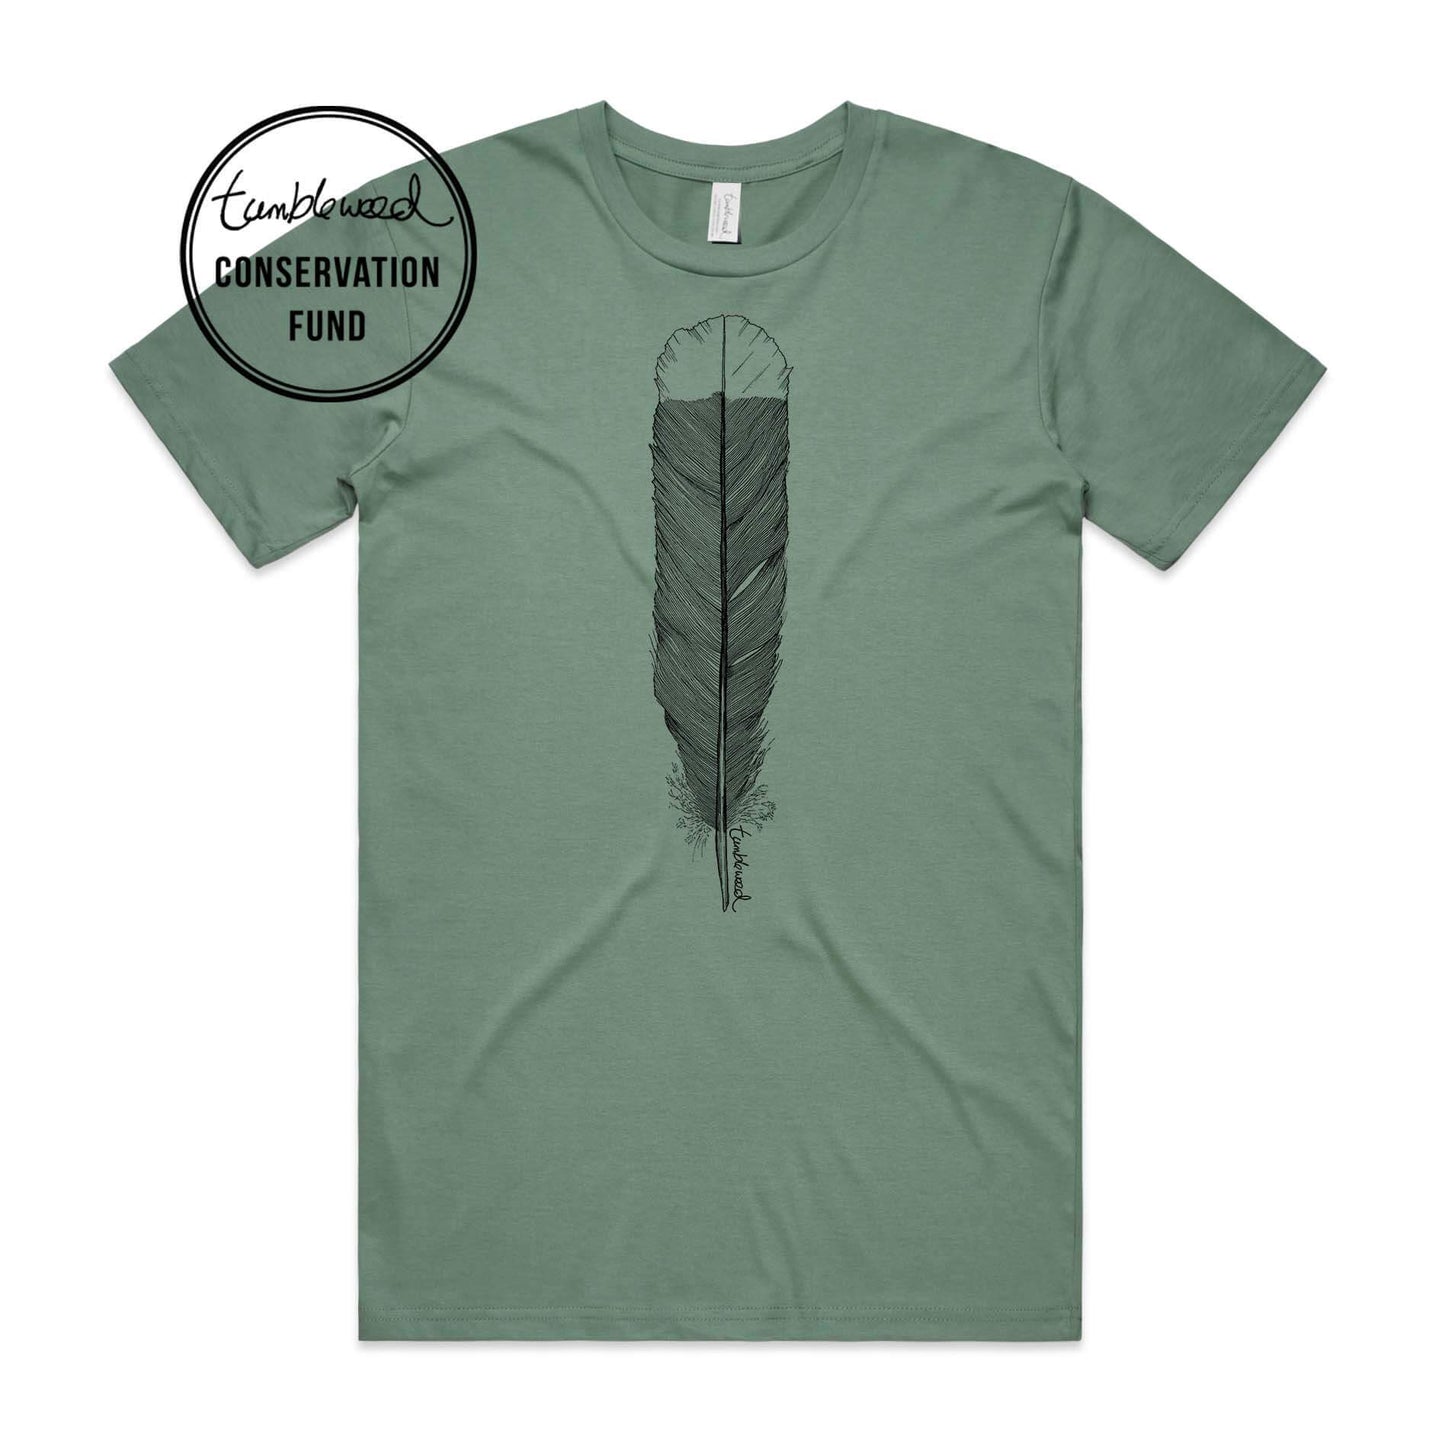 Sage, female t-shirt featuring a screen printed huia feather design.